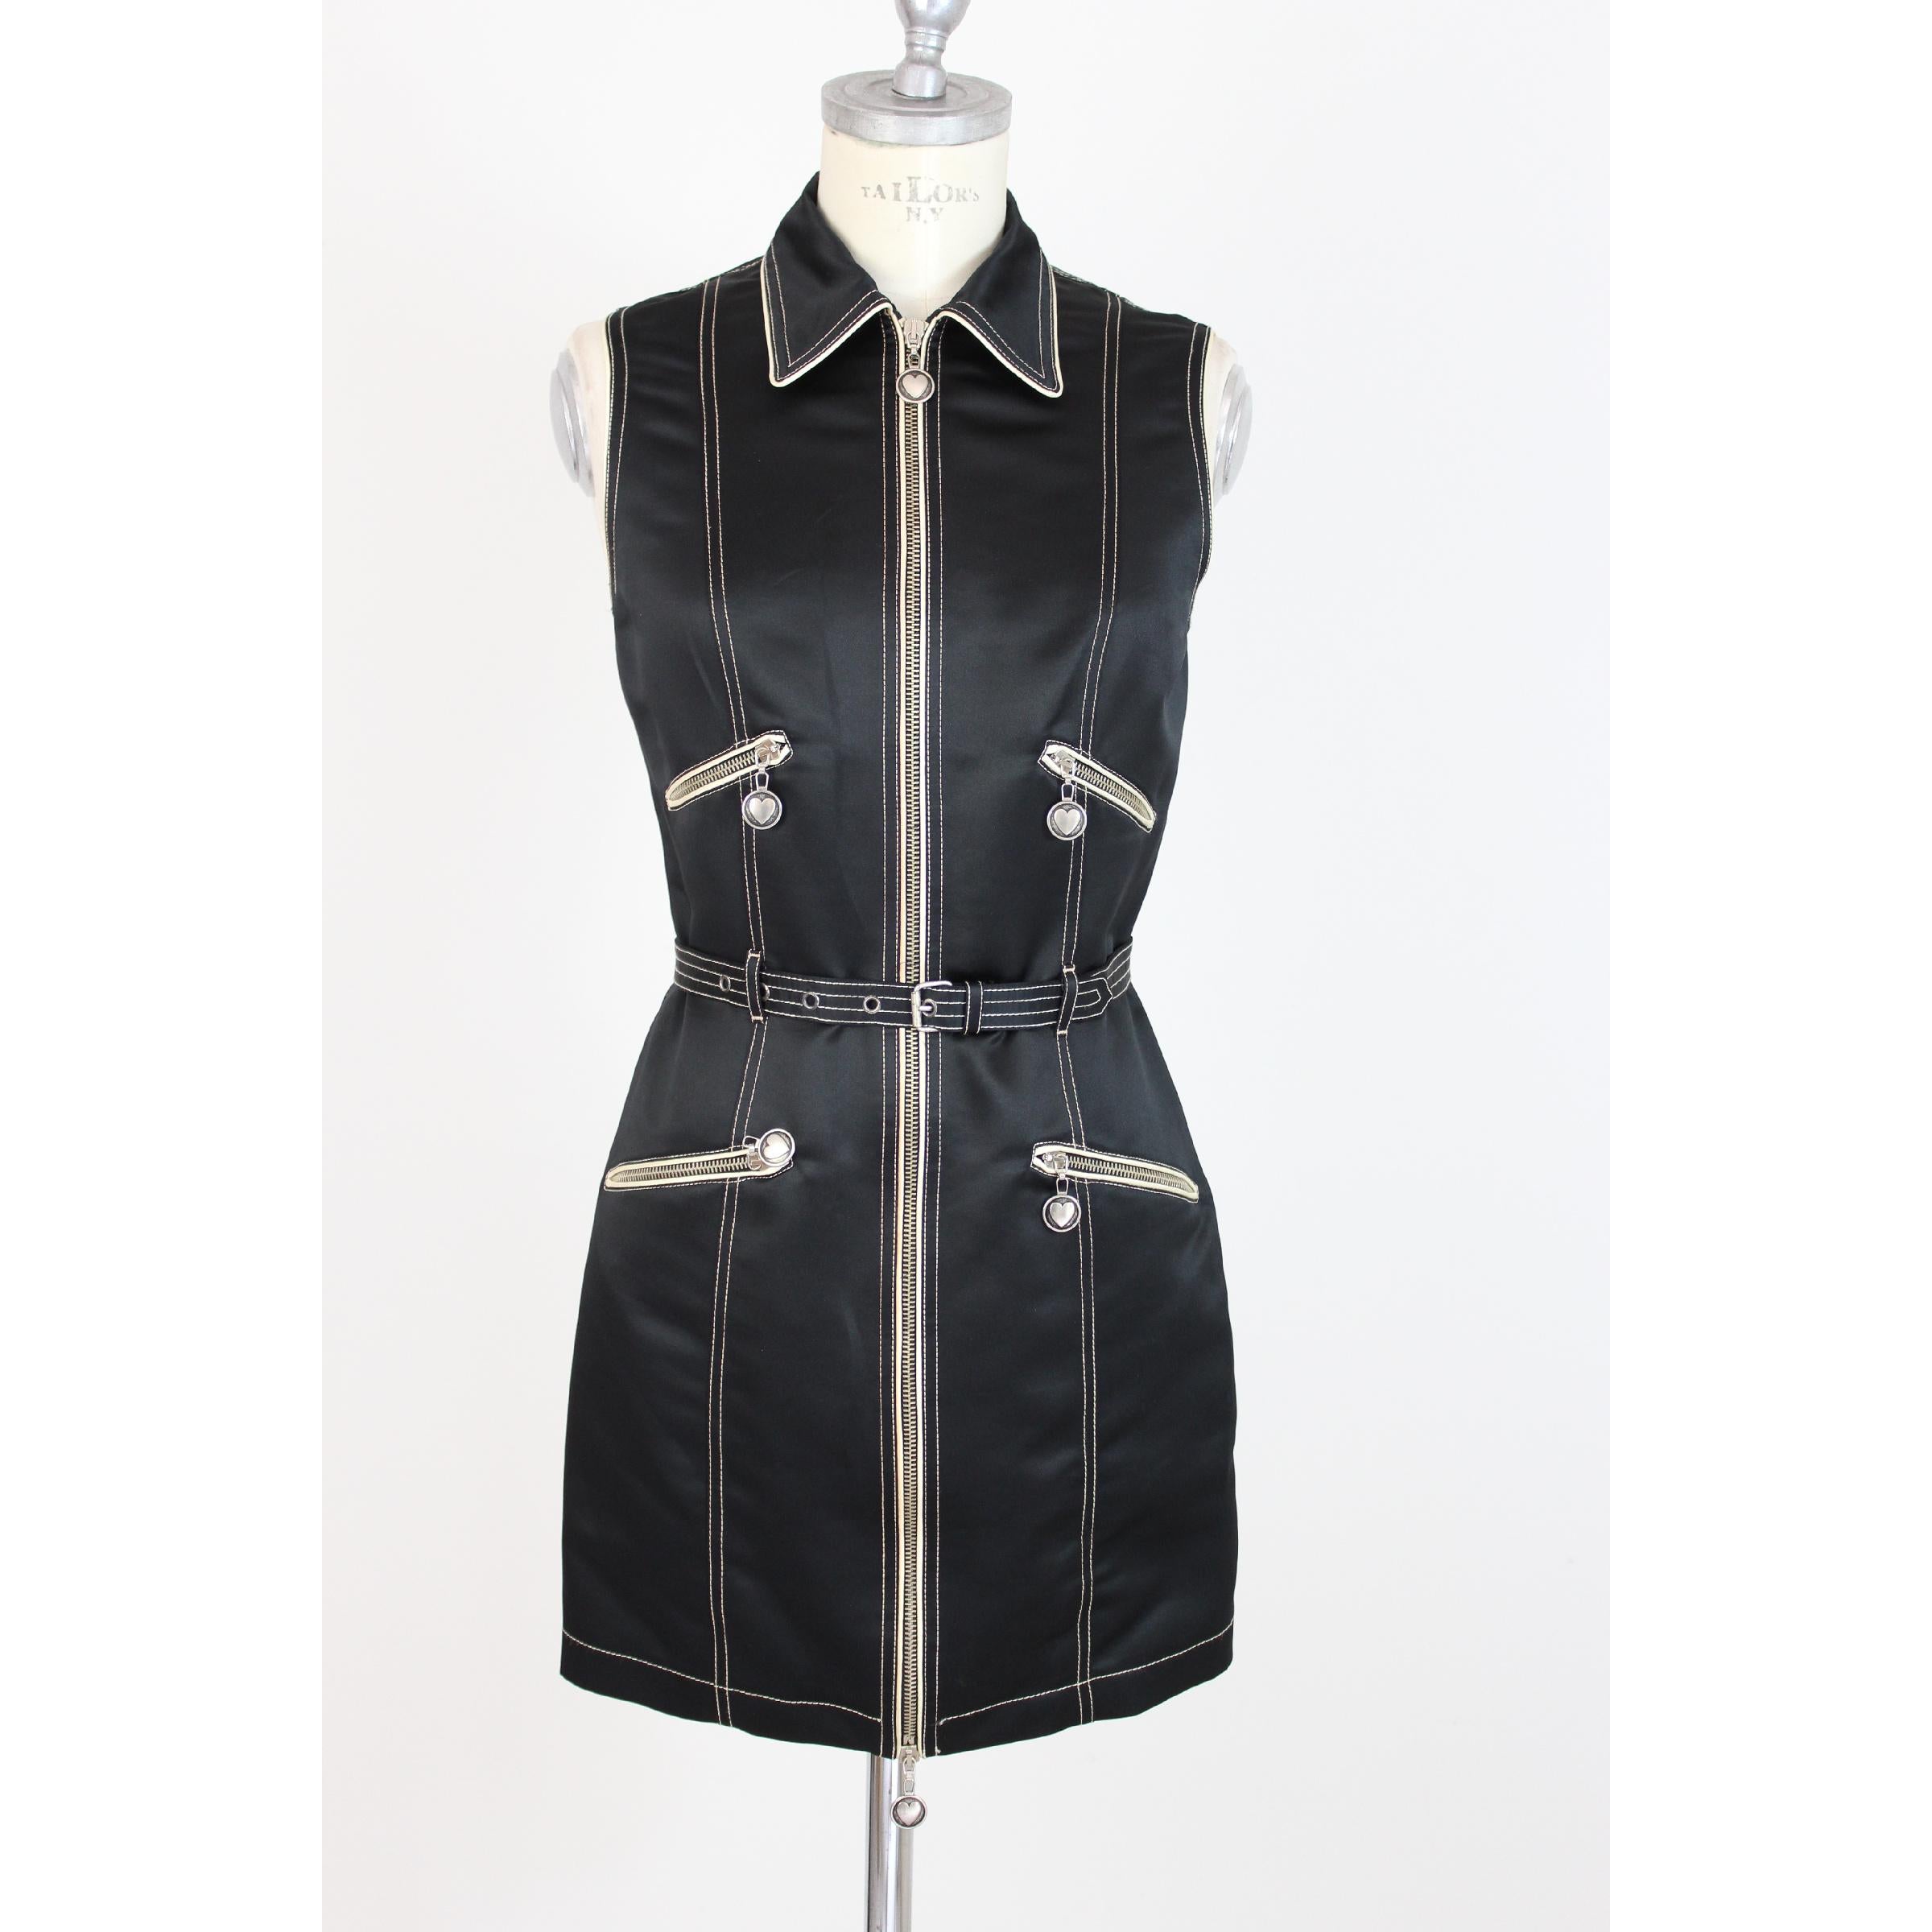 Moschino Jeans dress, black with beige stitching, 100% polyester. Short sleeveless dress with long closing all zip dress, waist belt, two chest pockets and two on the sides. Very good conditions.

Size: 42 It 8 Us 10 Uk

Shoulders: 42 cm
Bust /